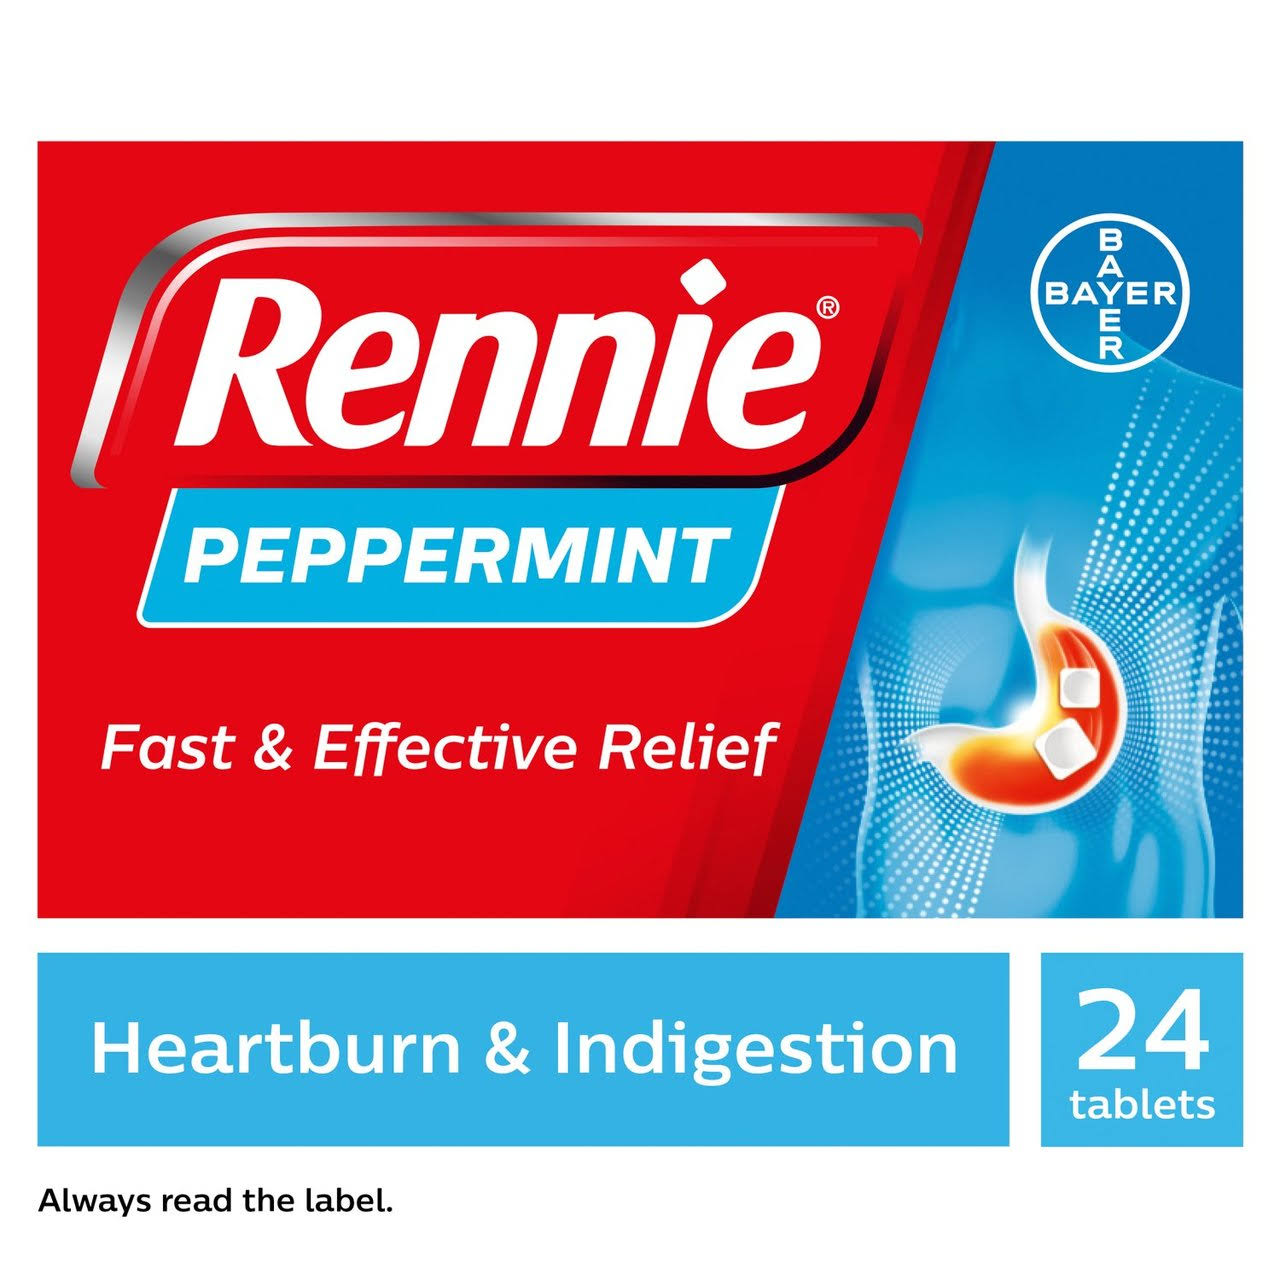 Rennie Indigestion and Heartburn Relief Chewable Tablets - Peppermint, 24 Tablets